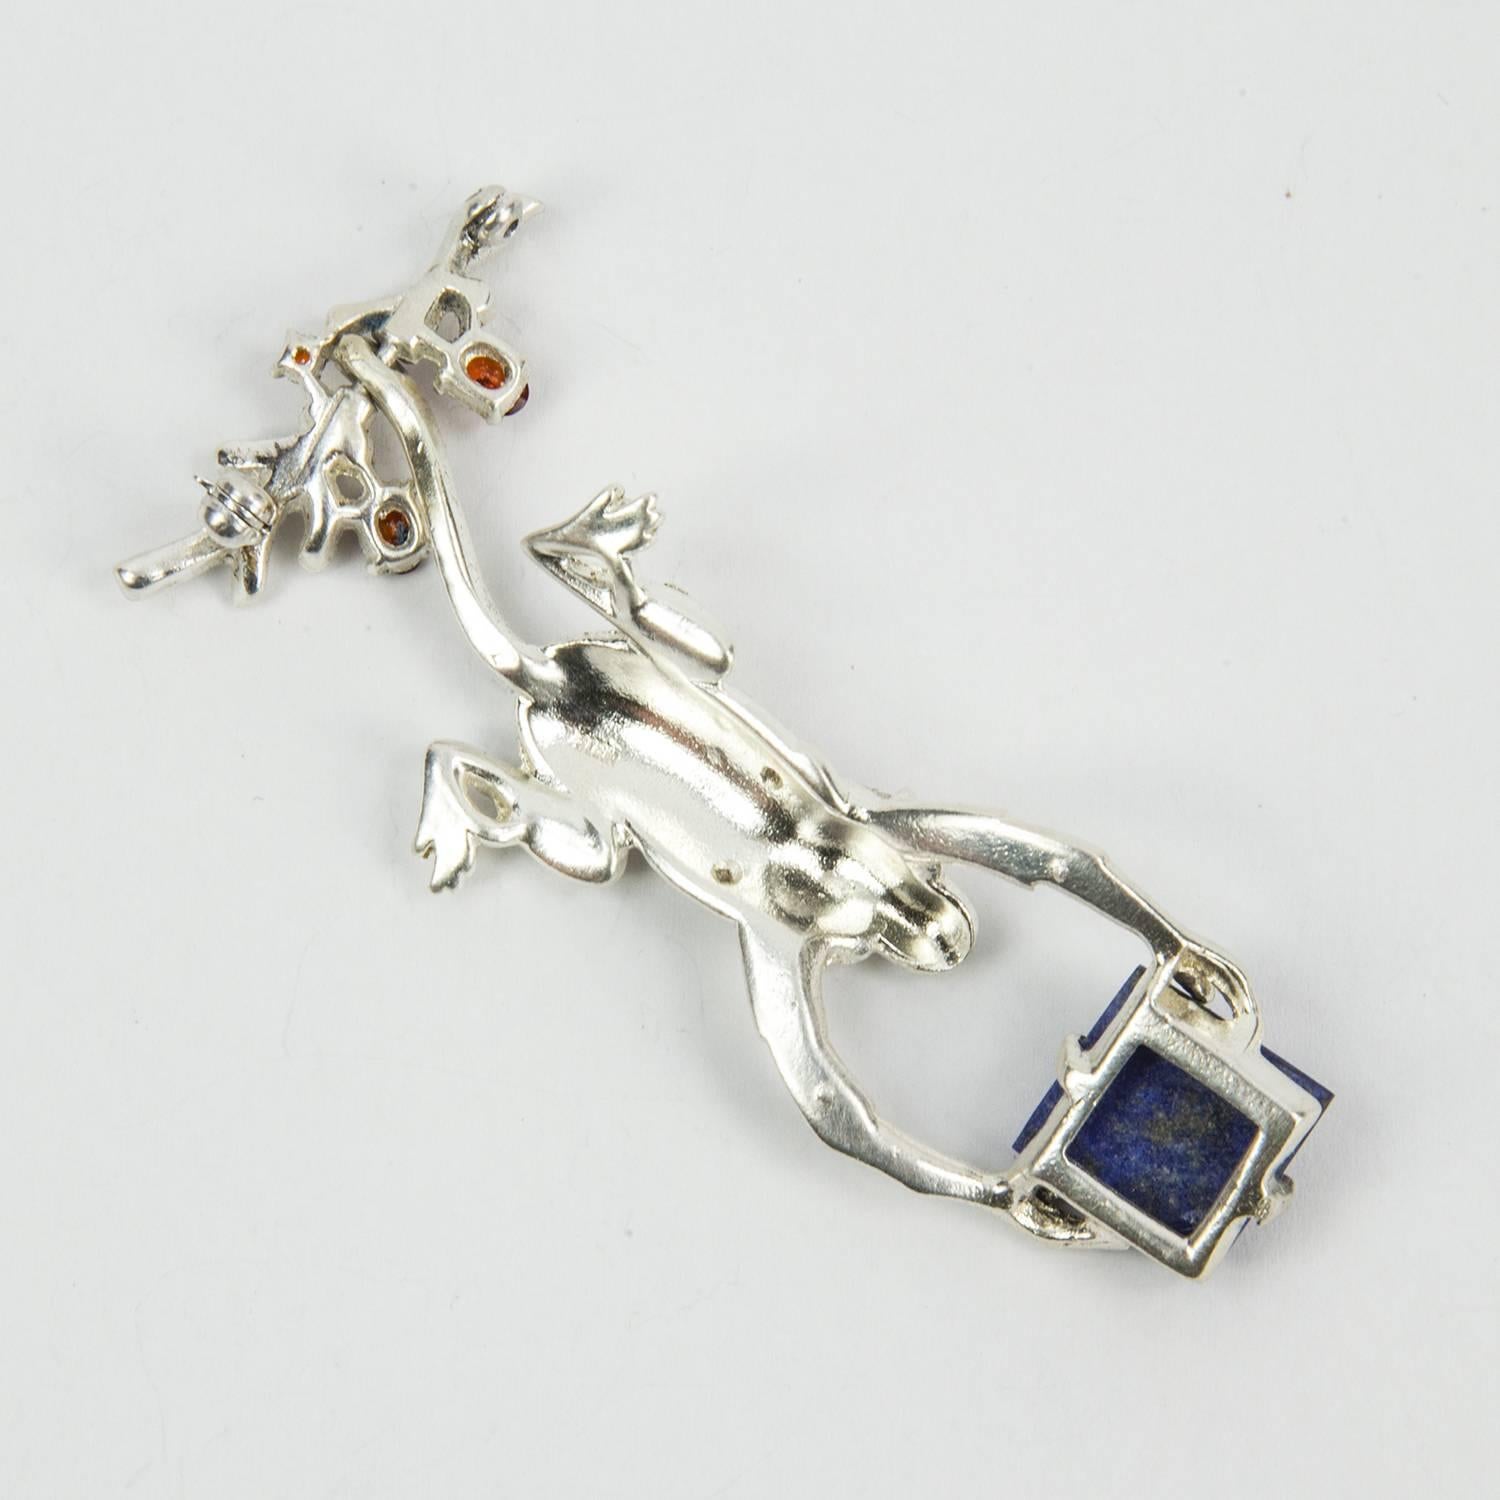 Rare beauty! Adorable Monkey holding a genuine Sugarloaf Lapis Lazuli gently swinging by his tail from the adorned branch pin, body set with sparkling CZ
rhinestones. Finely crafted in Sterling Silver; measuring approx. 2.75” long. Add a little